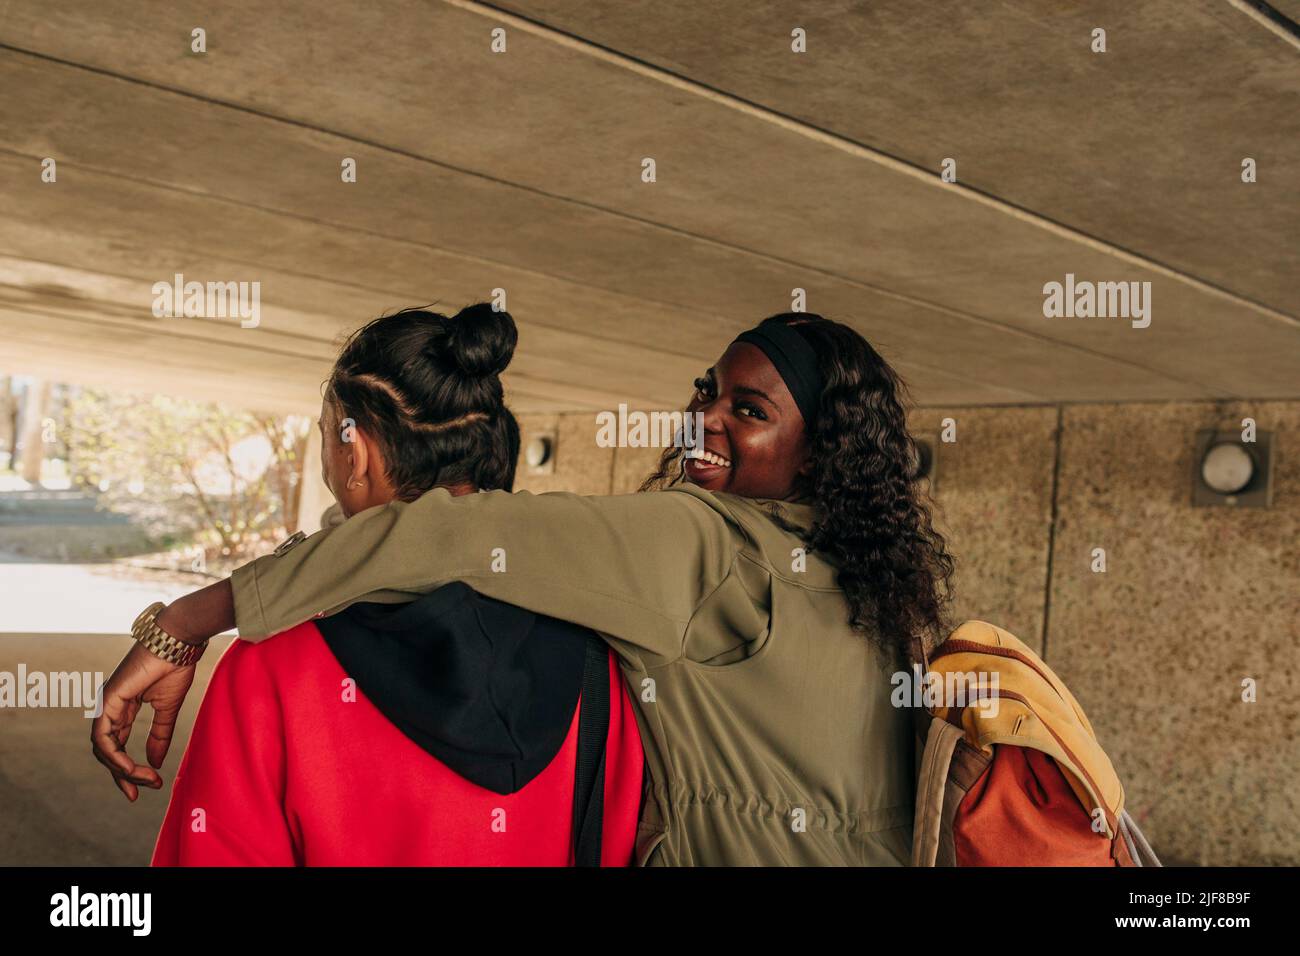 Portrait of smiling woman with arm around male friend walking together in underpass Stock Photo